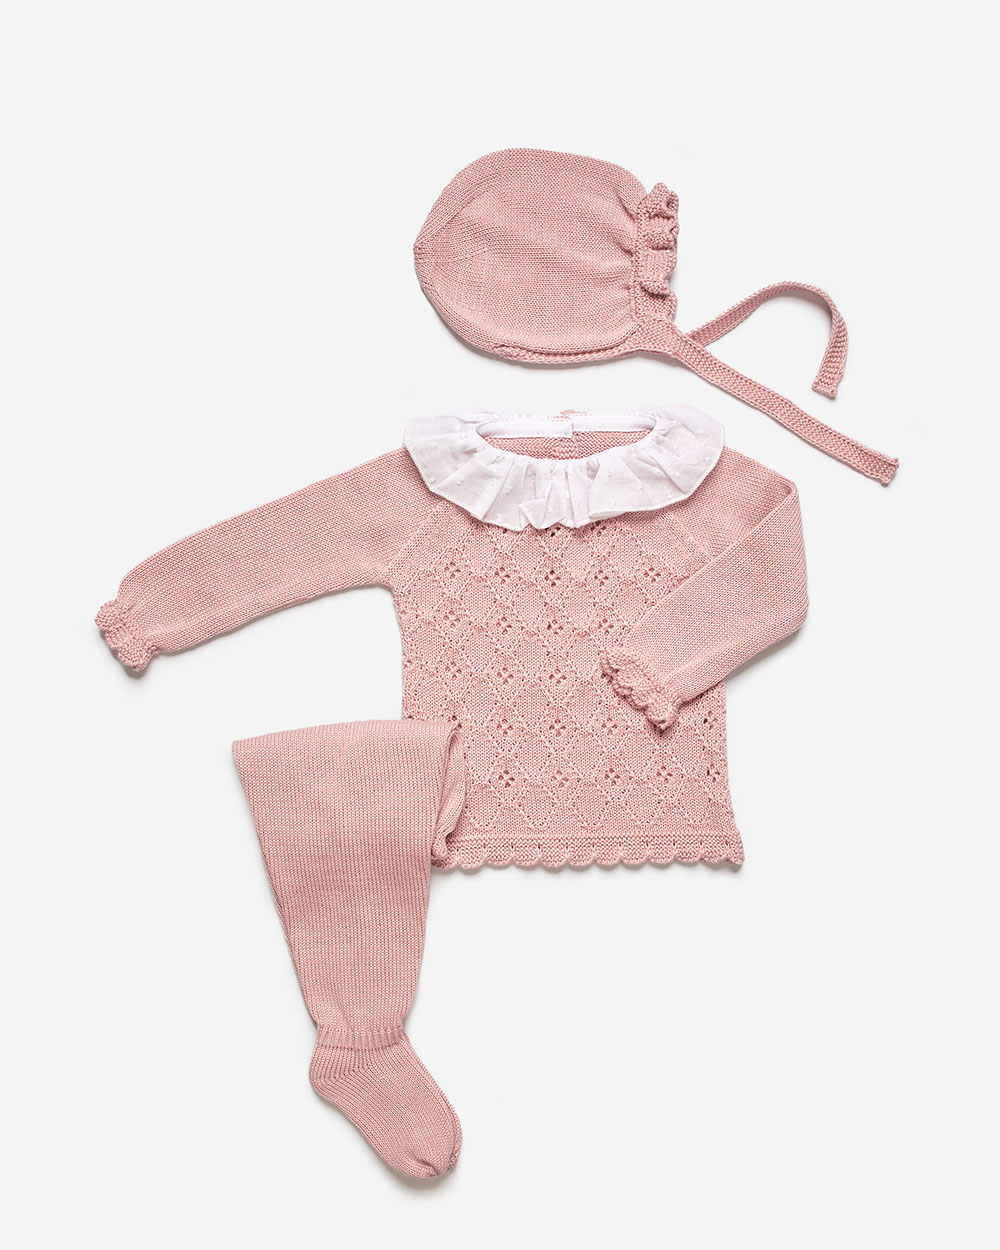 Powder pink knit baby outfit